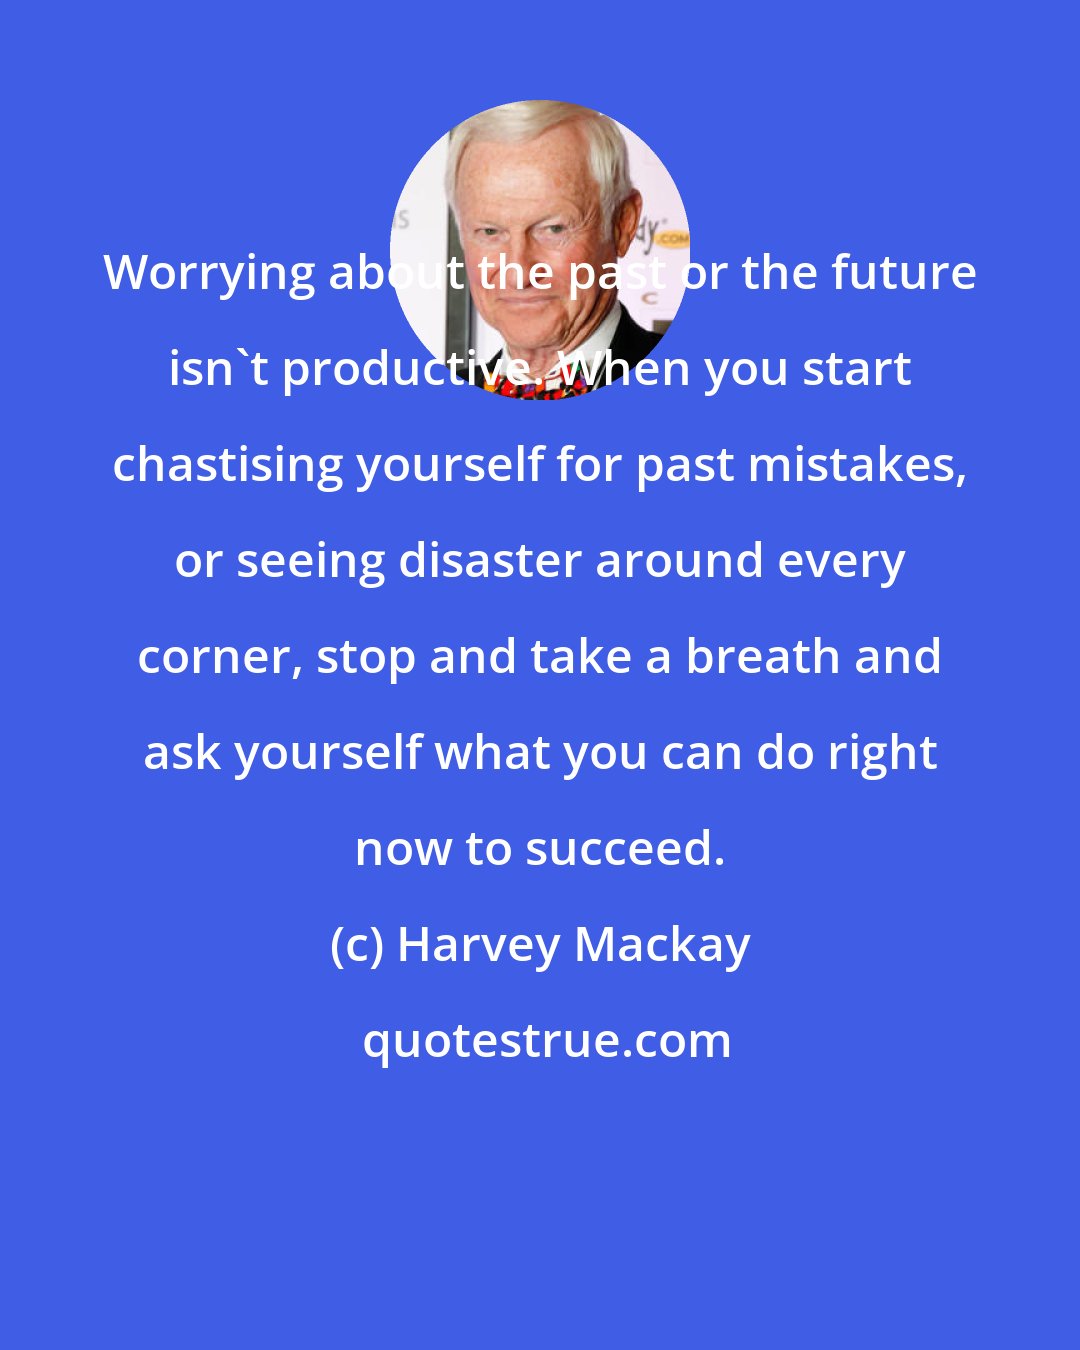 Harvey Mackay: Worrying about the past or the future isn't productive. When you start chastising yourself for past mistakes, or seeing disaster around every corner, stop and take a breath and ask yourself what you can do right now to succeed.